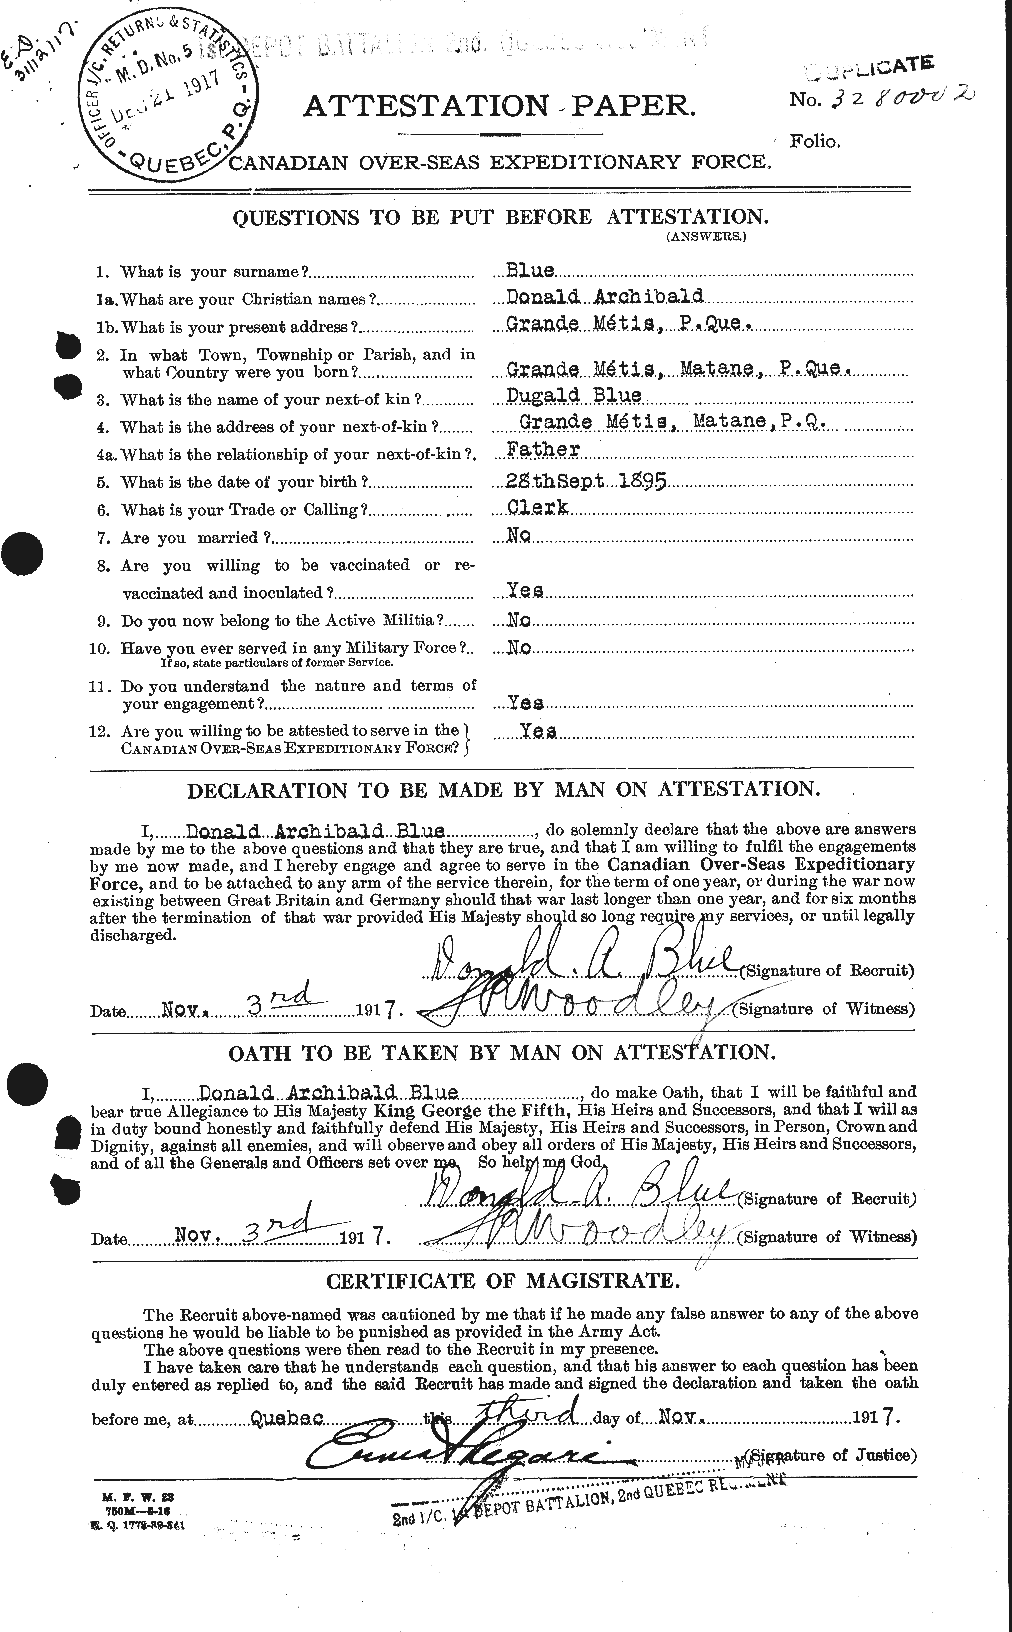 Personnel Records of the First World War - CEF 247123a